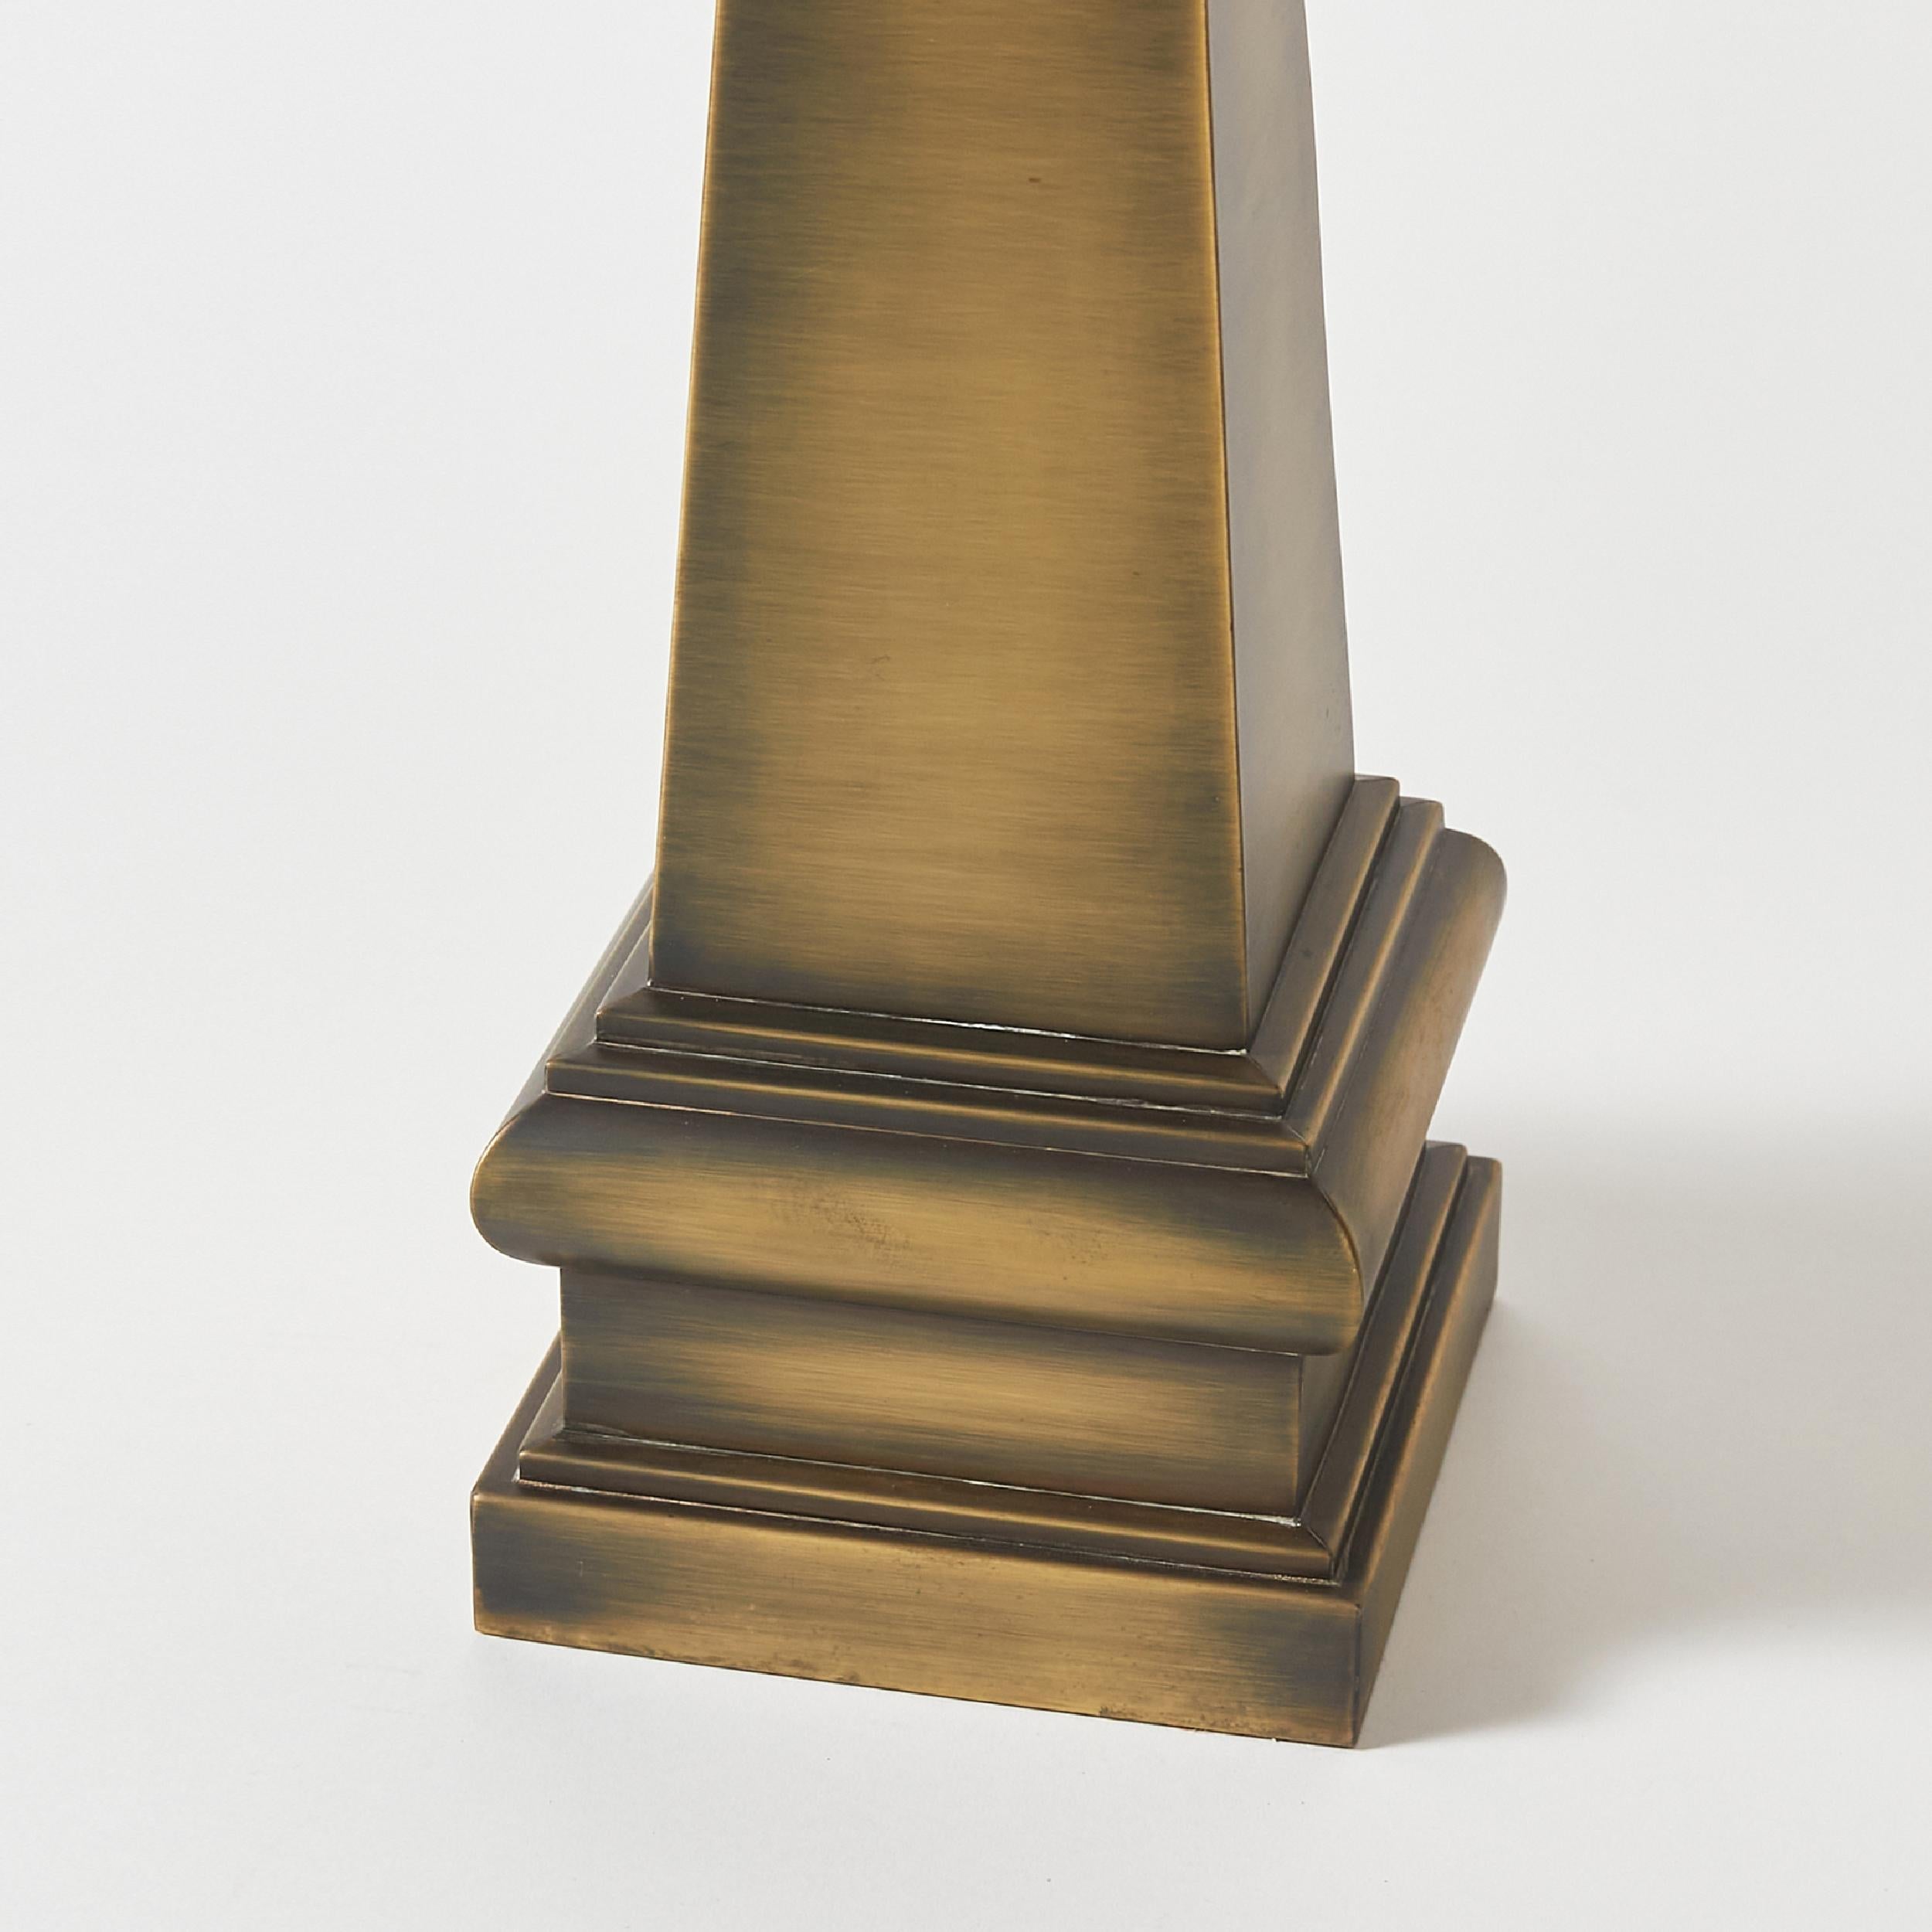 American Brass Obelisk Refinished in Antique Bronze Finish from Gimbels Department Store For Sale